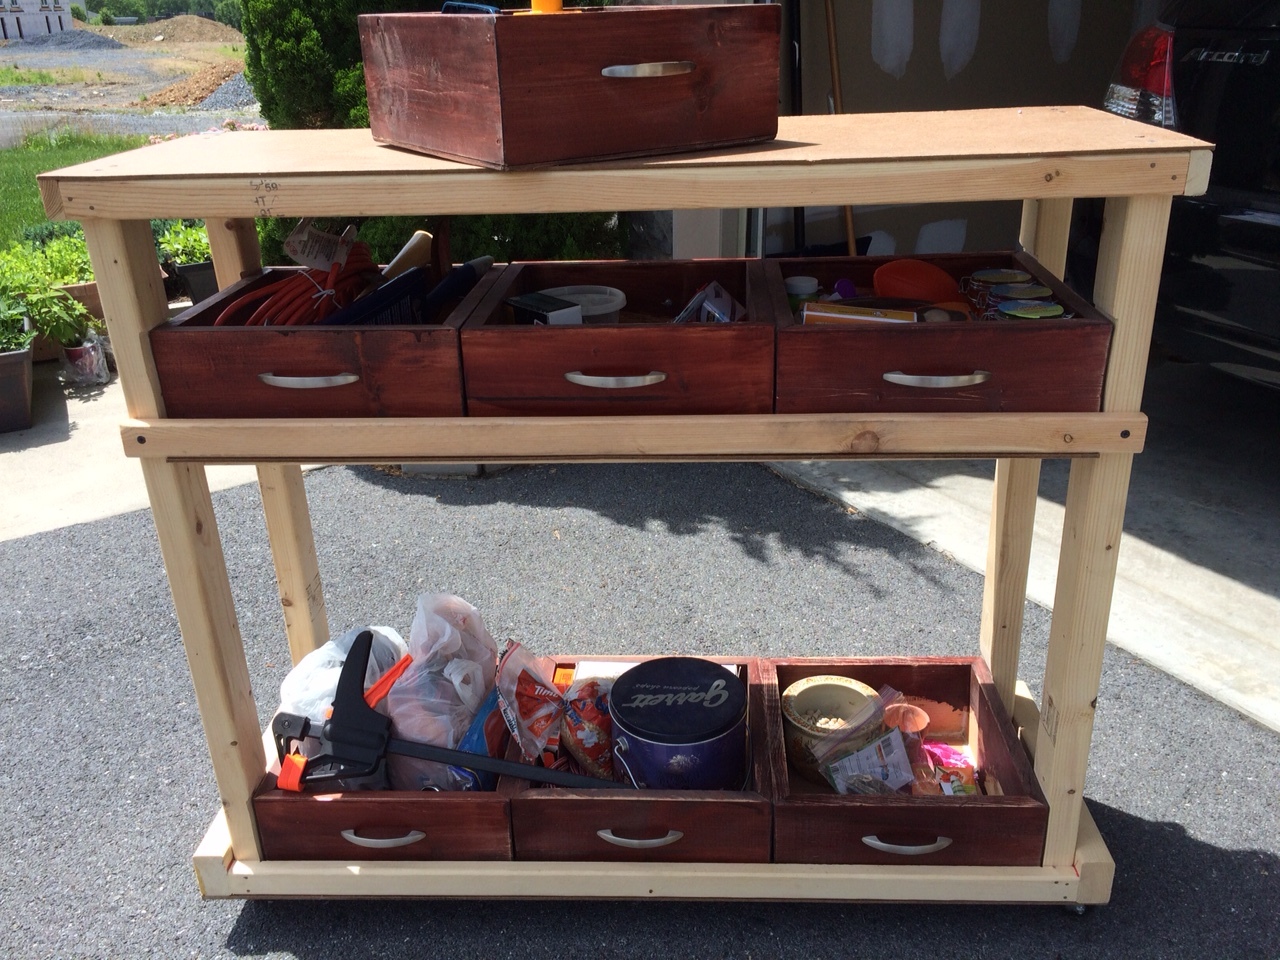 Moveable Workbench with Storage Bins - RYOBI Nation Projects